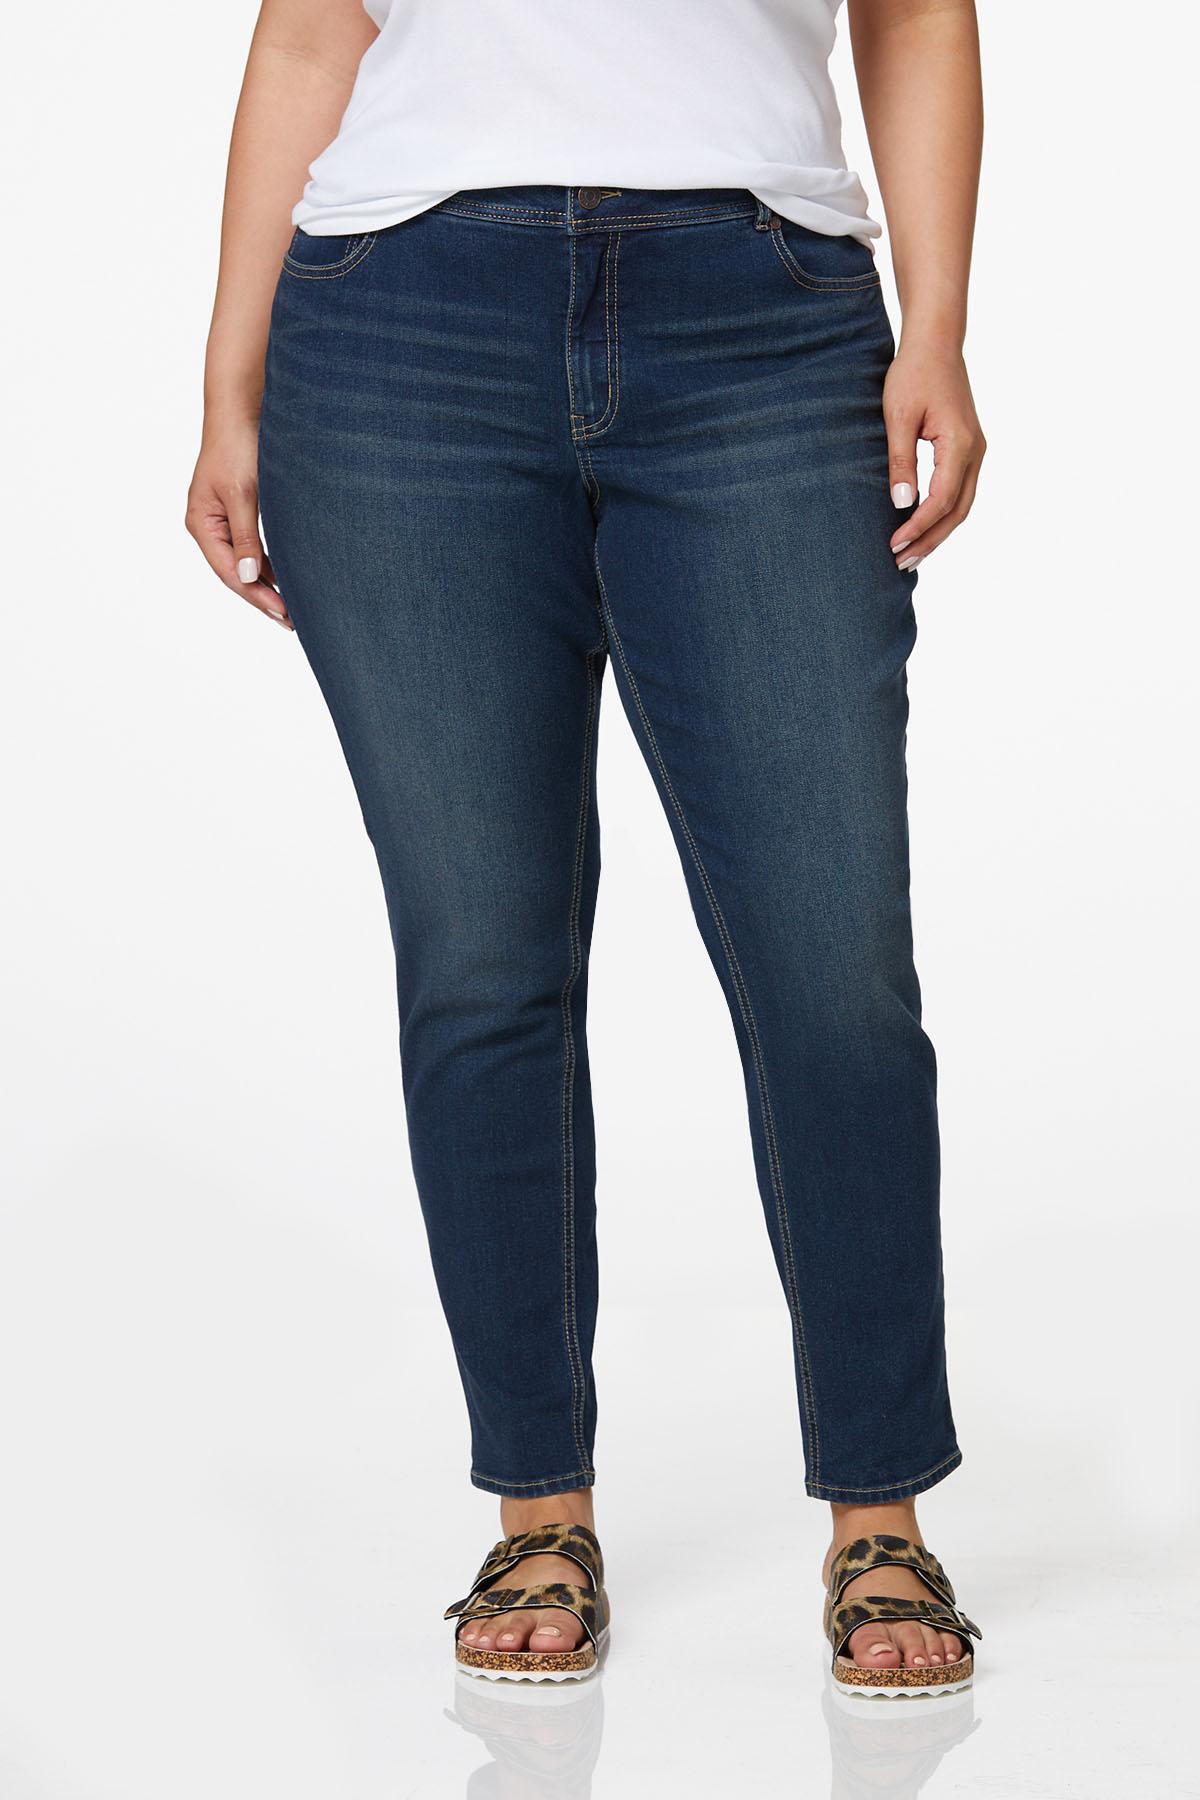 Cato Fashions  Cato Plus Size Curvy Fit Skinny Jeans